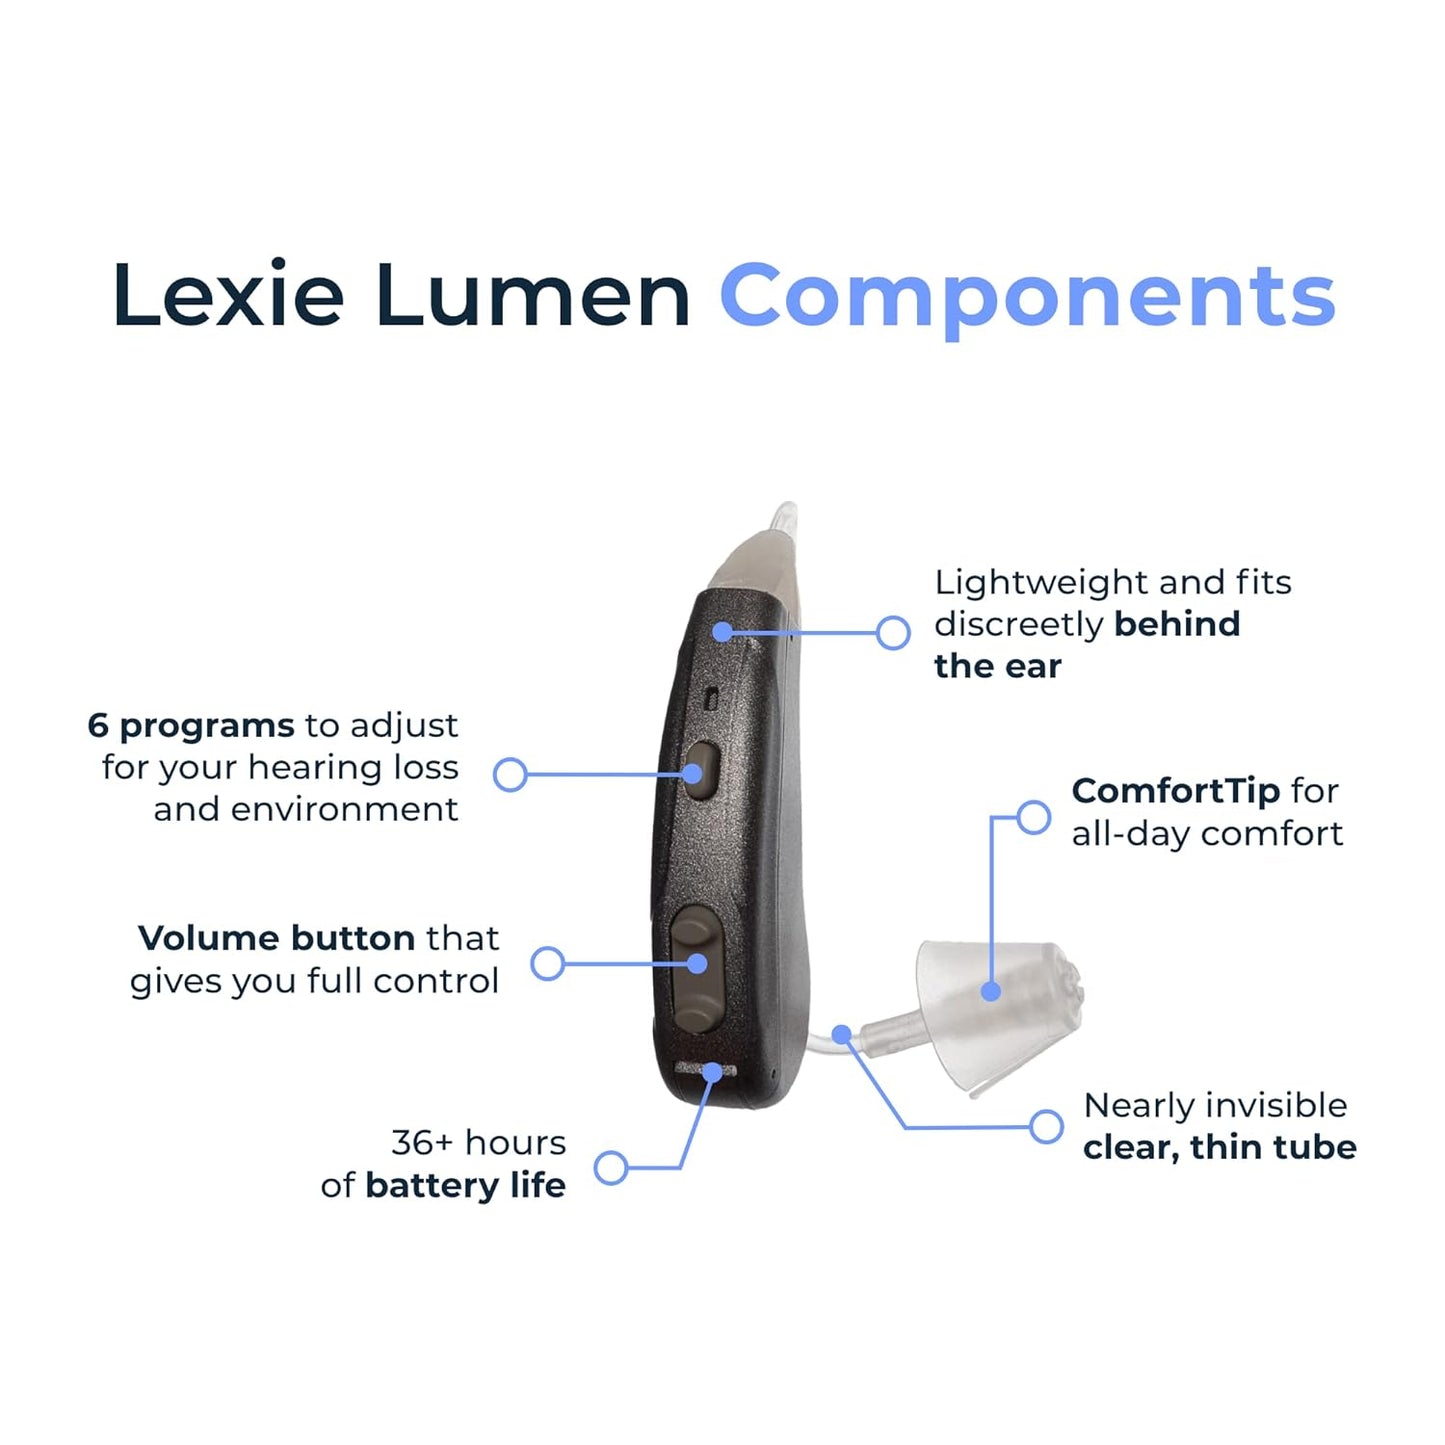 Lexie Lumen Self-Fitting OTC Hearing Aids | Mild-Moderate Hearing Loss | Bluetooth Hearing Aid with Invisible Fit | Directional Hearing, Advanced Battery Power, & Smartphone Control (Metallic Black) (Me